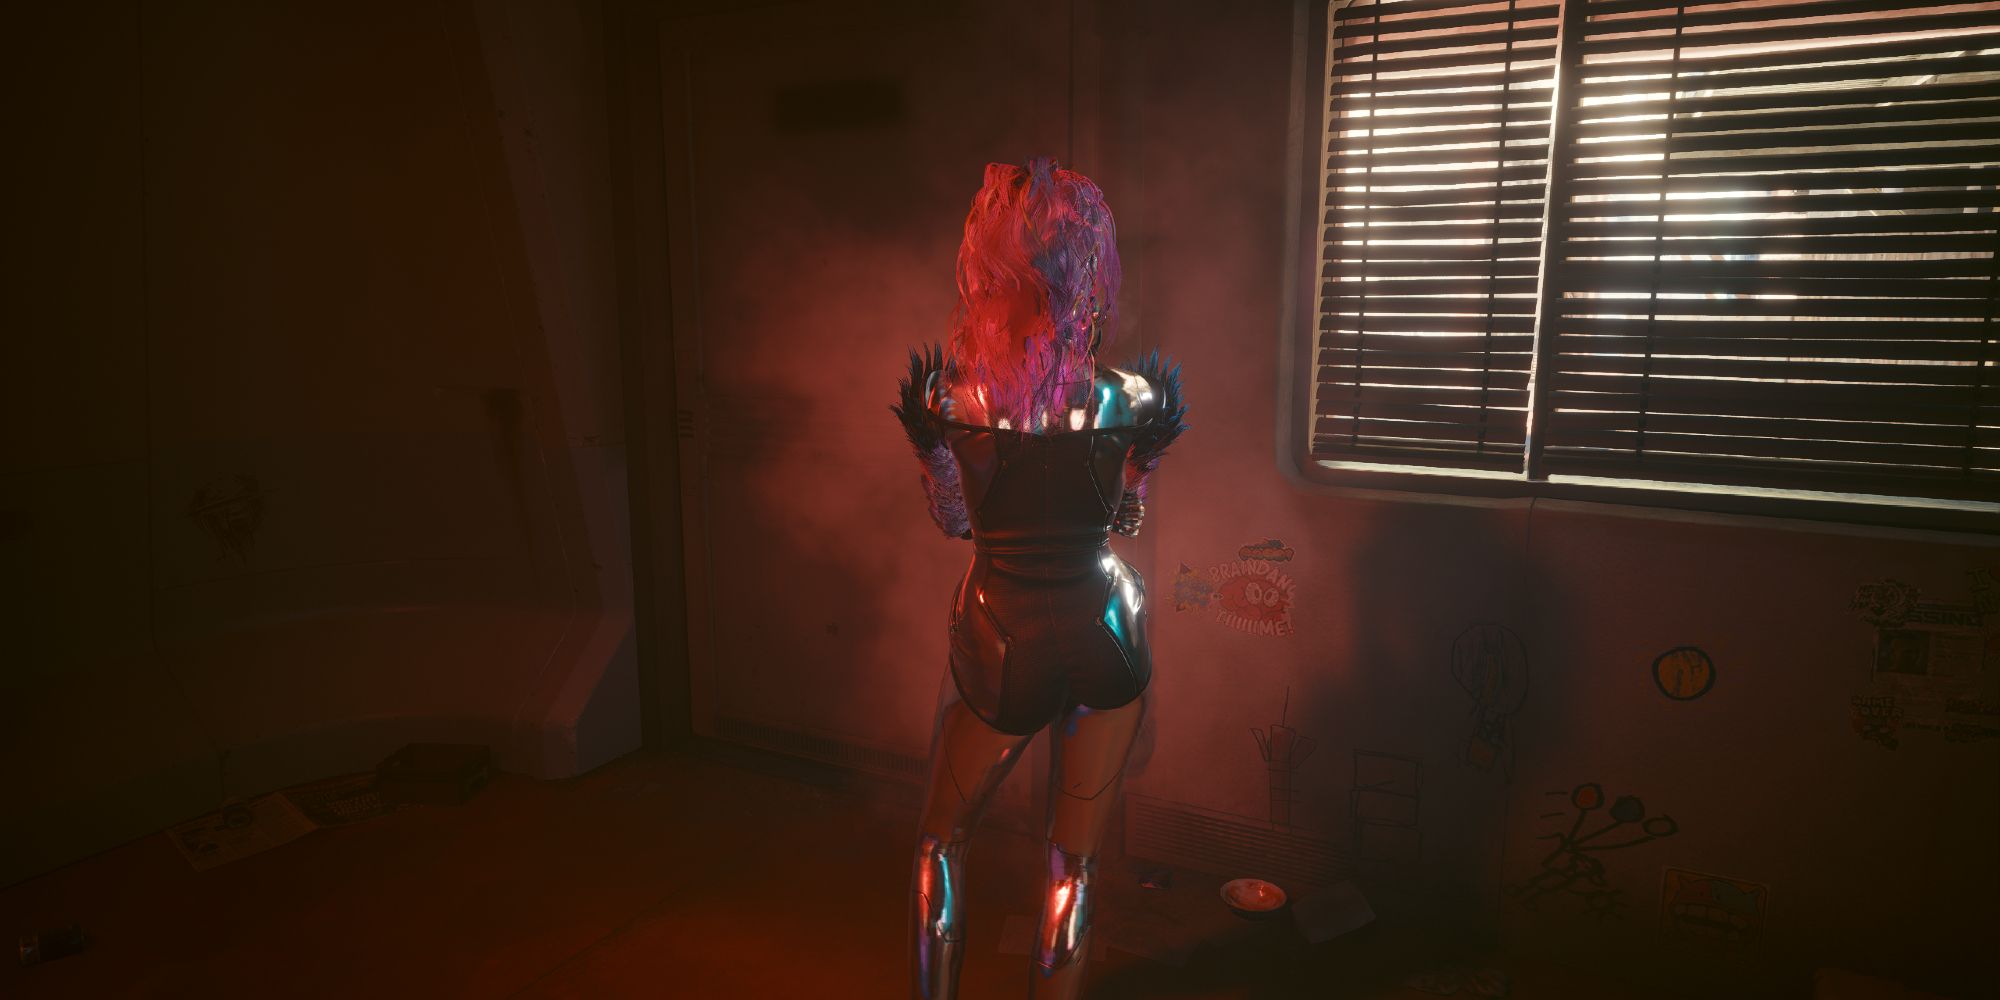 Lizzy Wizzy introducing herself to V in the No-Tell Motel in Cyberpunk 2077.